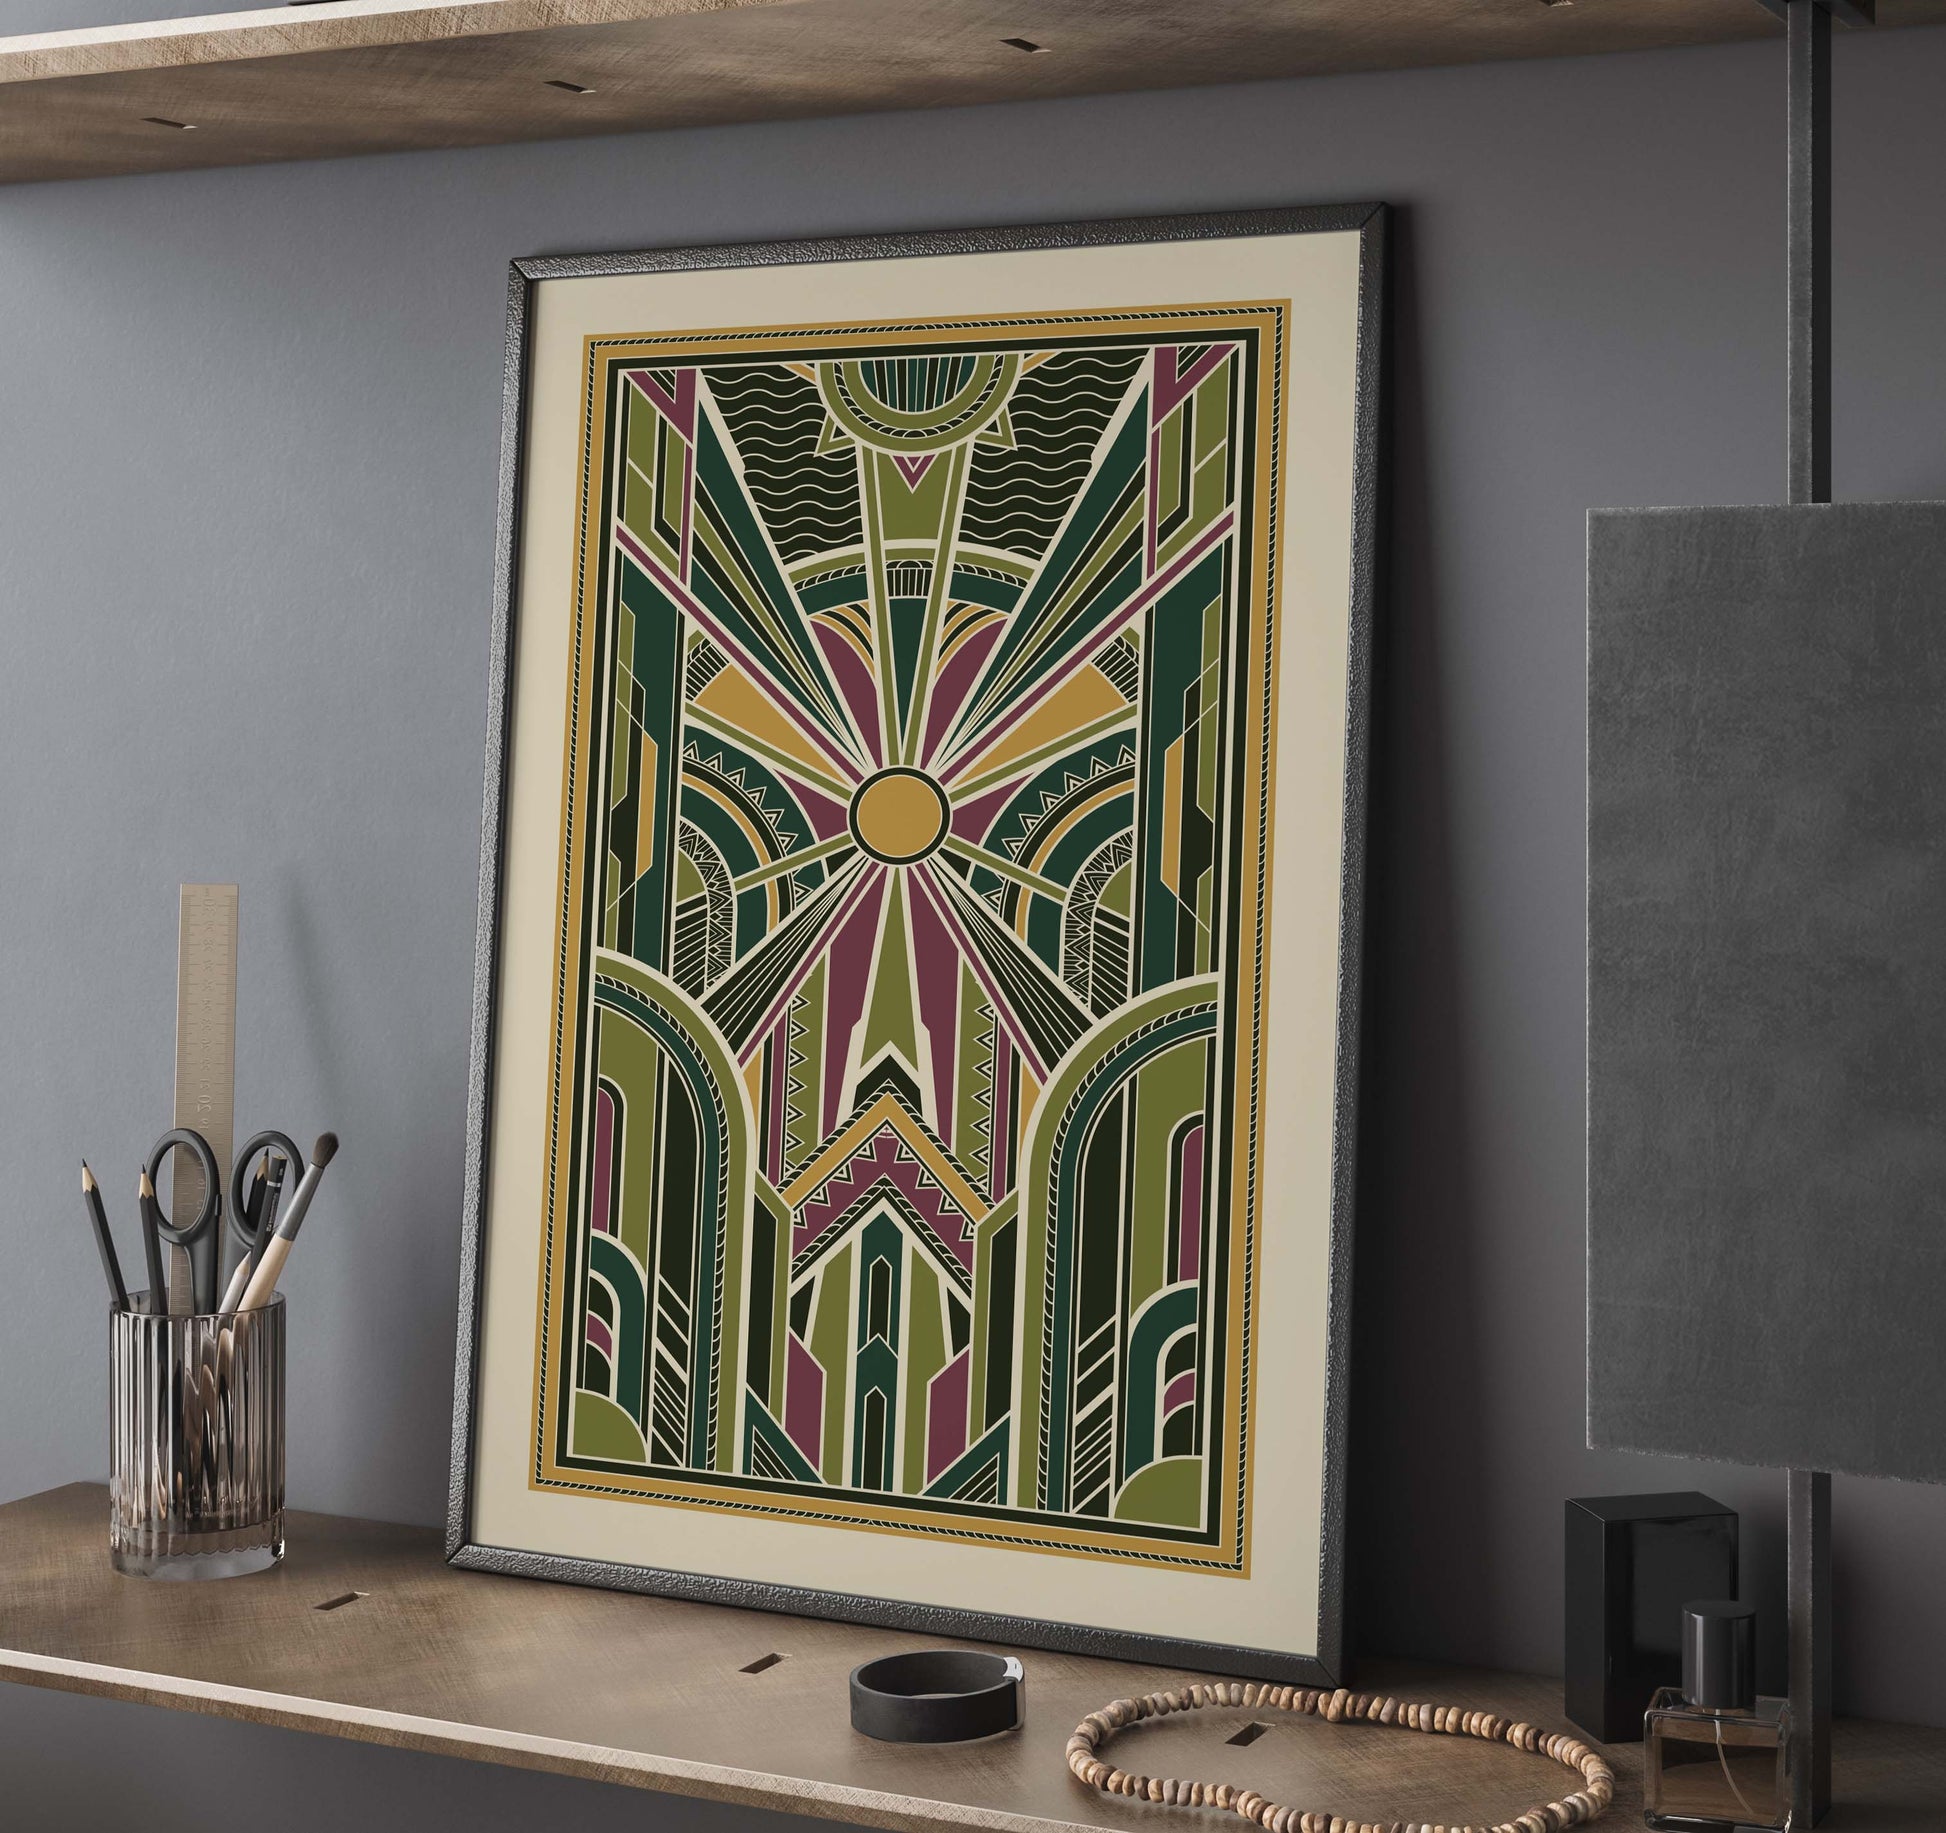 Art deco wall art print with geometric pattern in green and gold